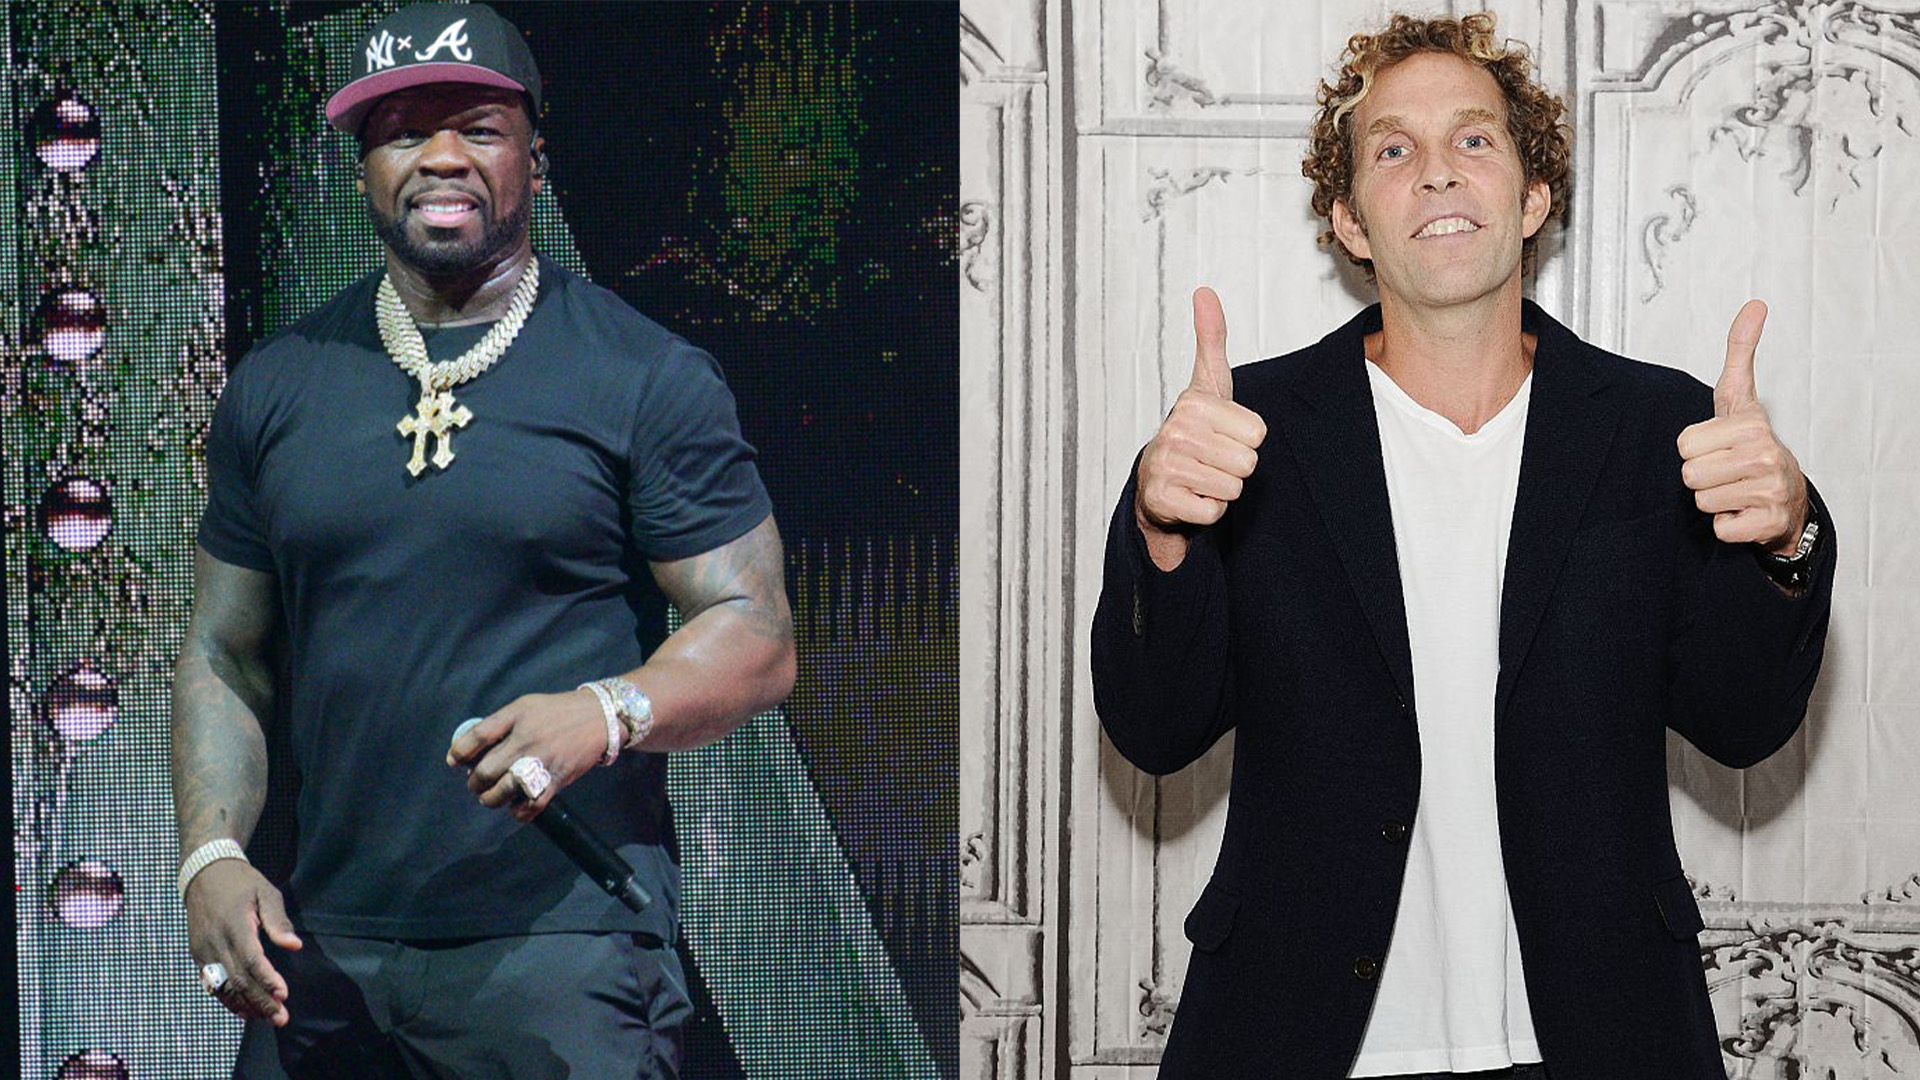 After Interning For Jesse Itzler, 50 Cent Stayed Loyal By Inking Contracts To Only Fly With The Entrepreneur's Jet Company